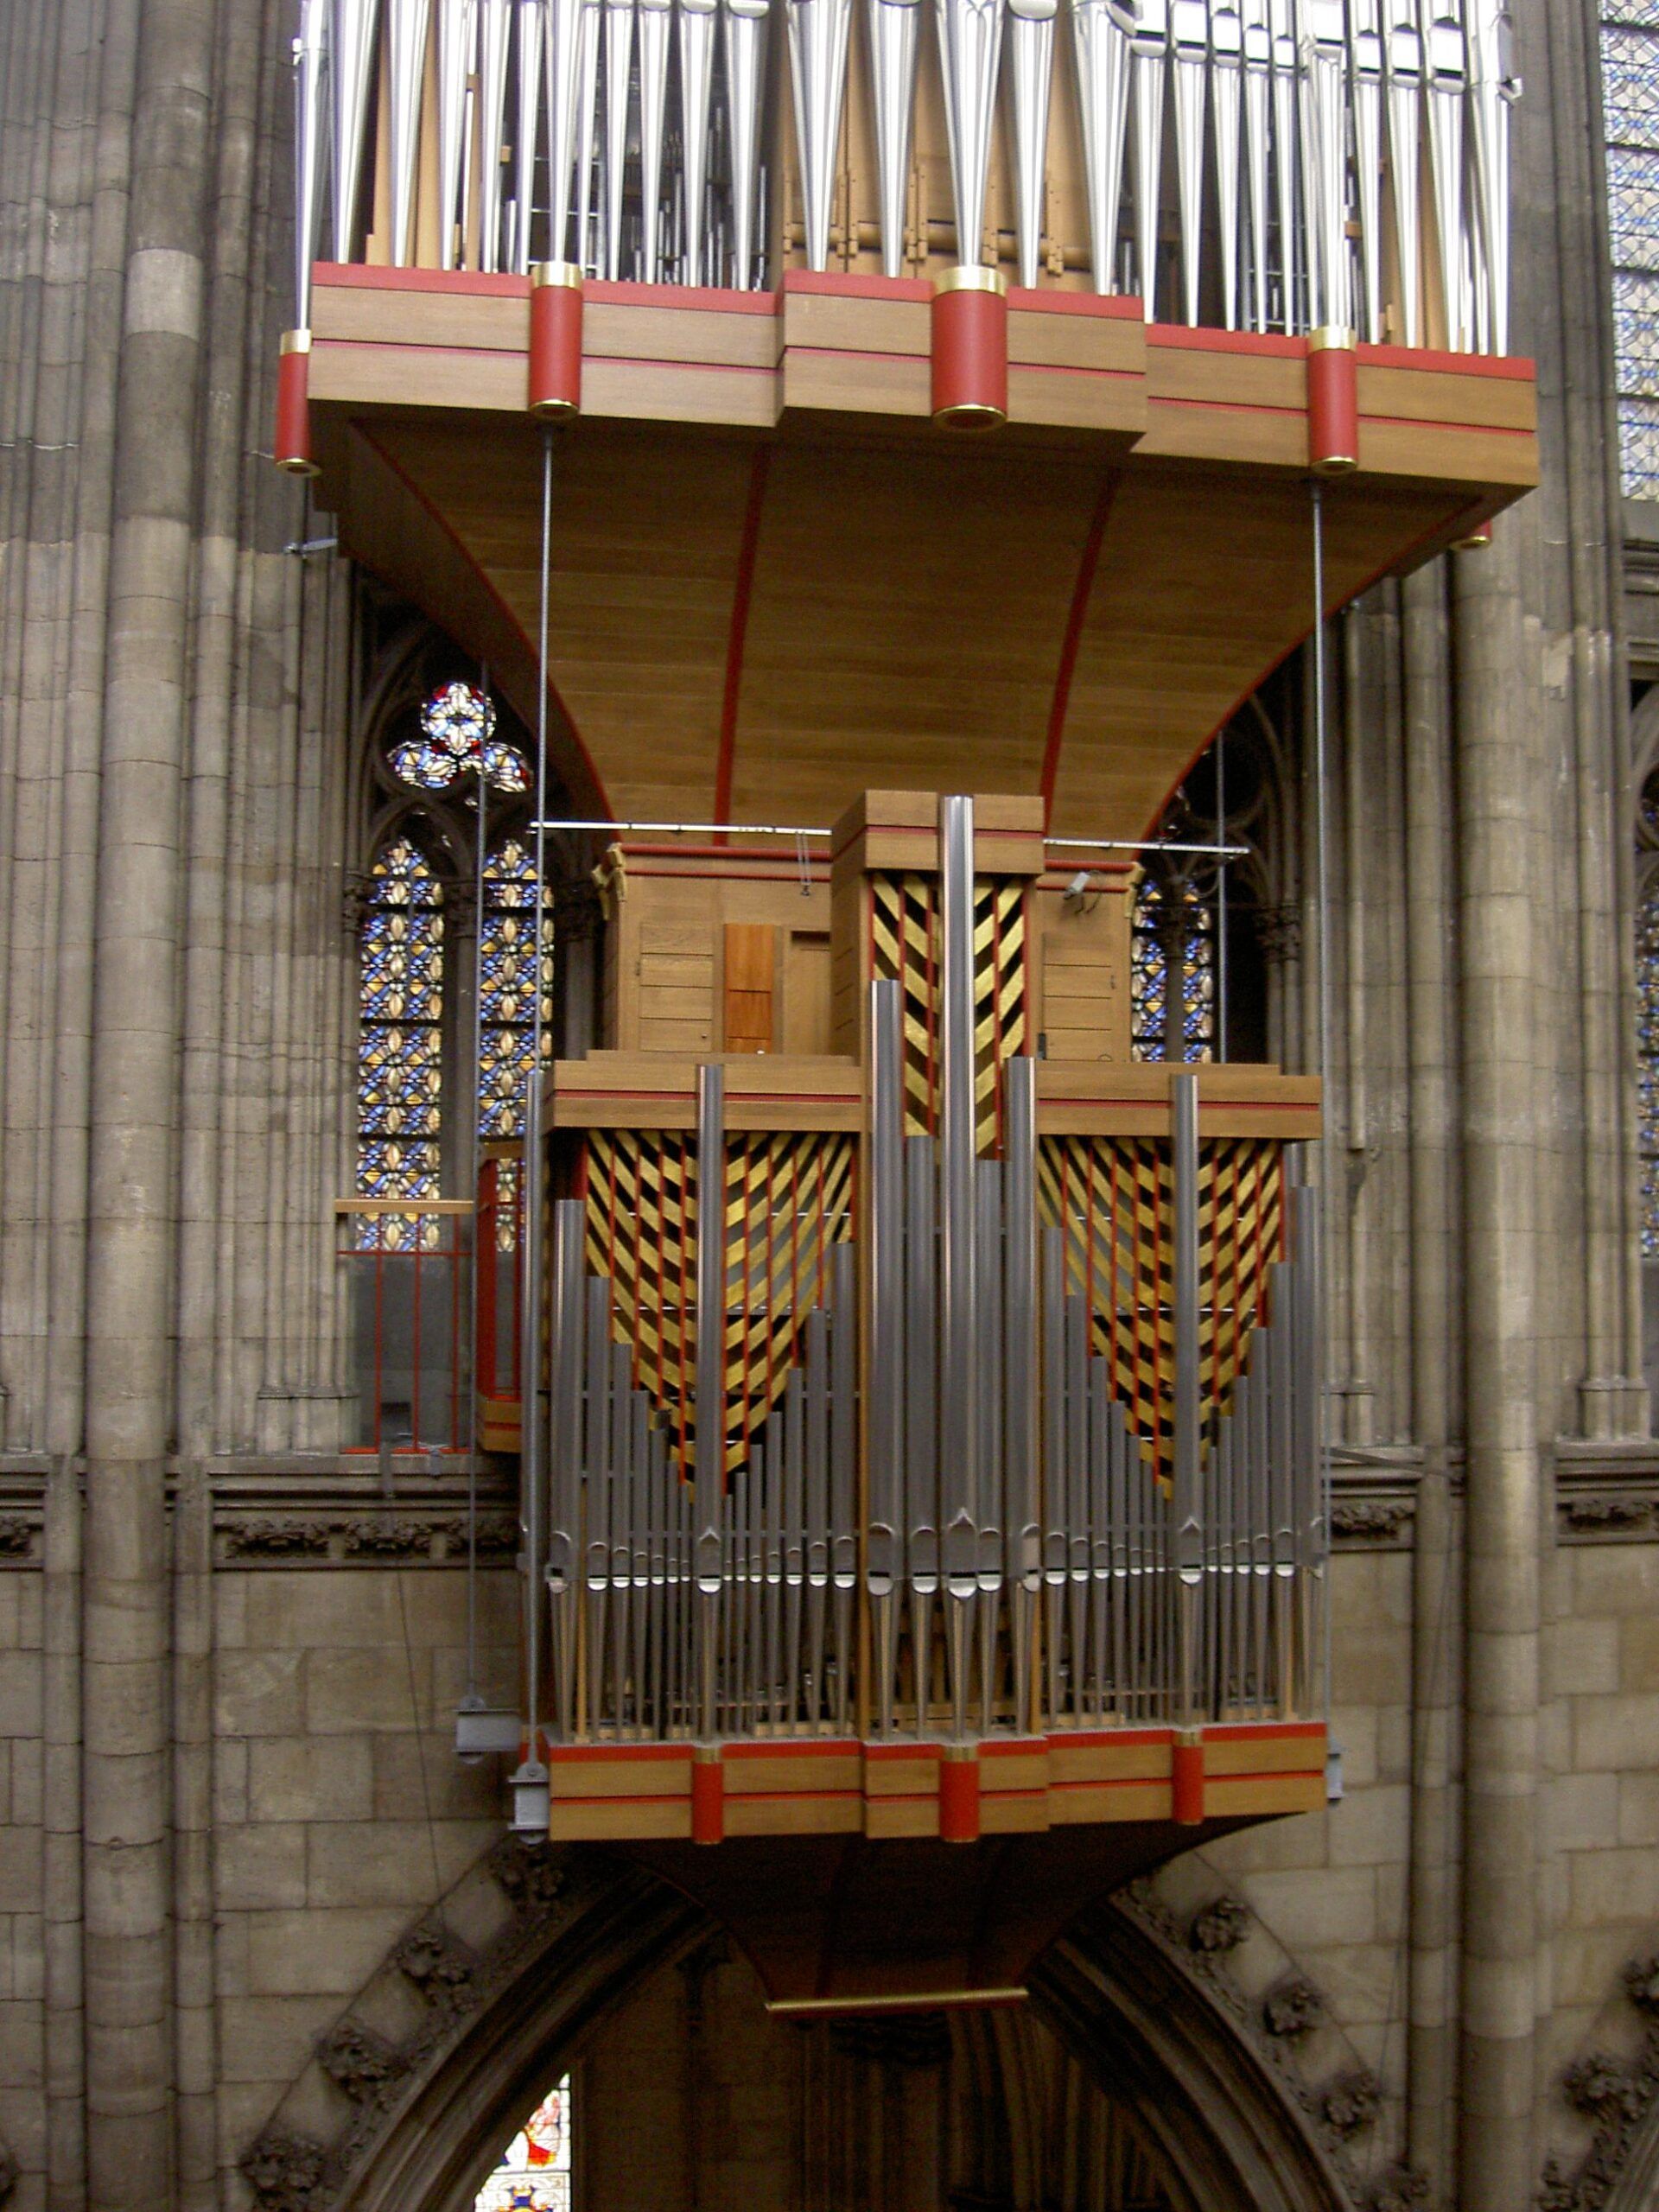 Guideposts: The "swallow's nest" organ, built in 1998 to celebrate the Cologne Cathedral's 750 years.